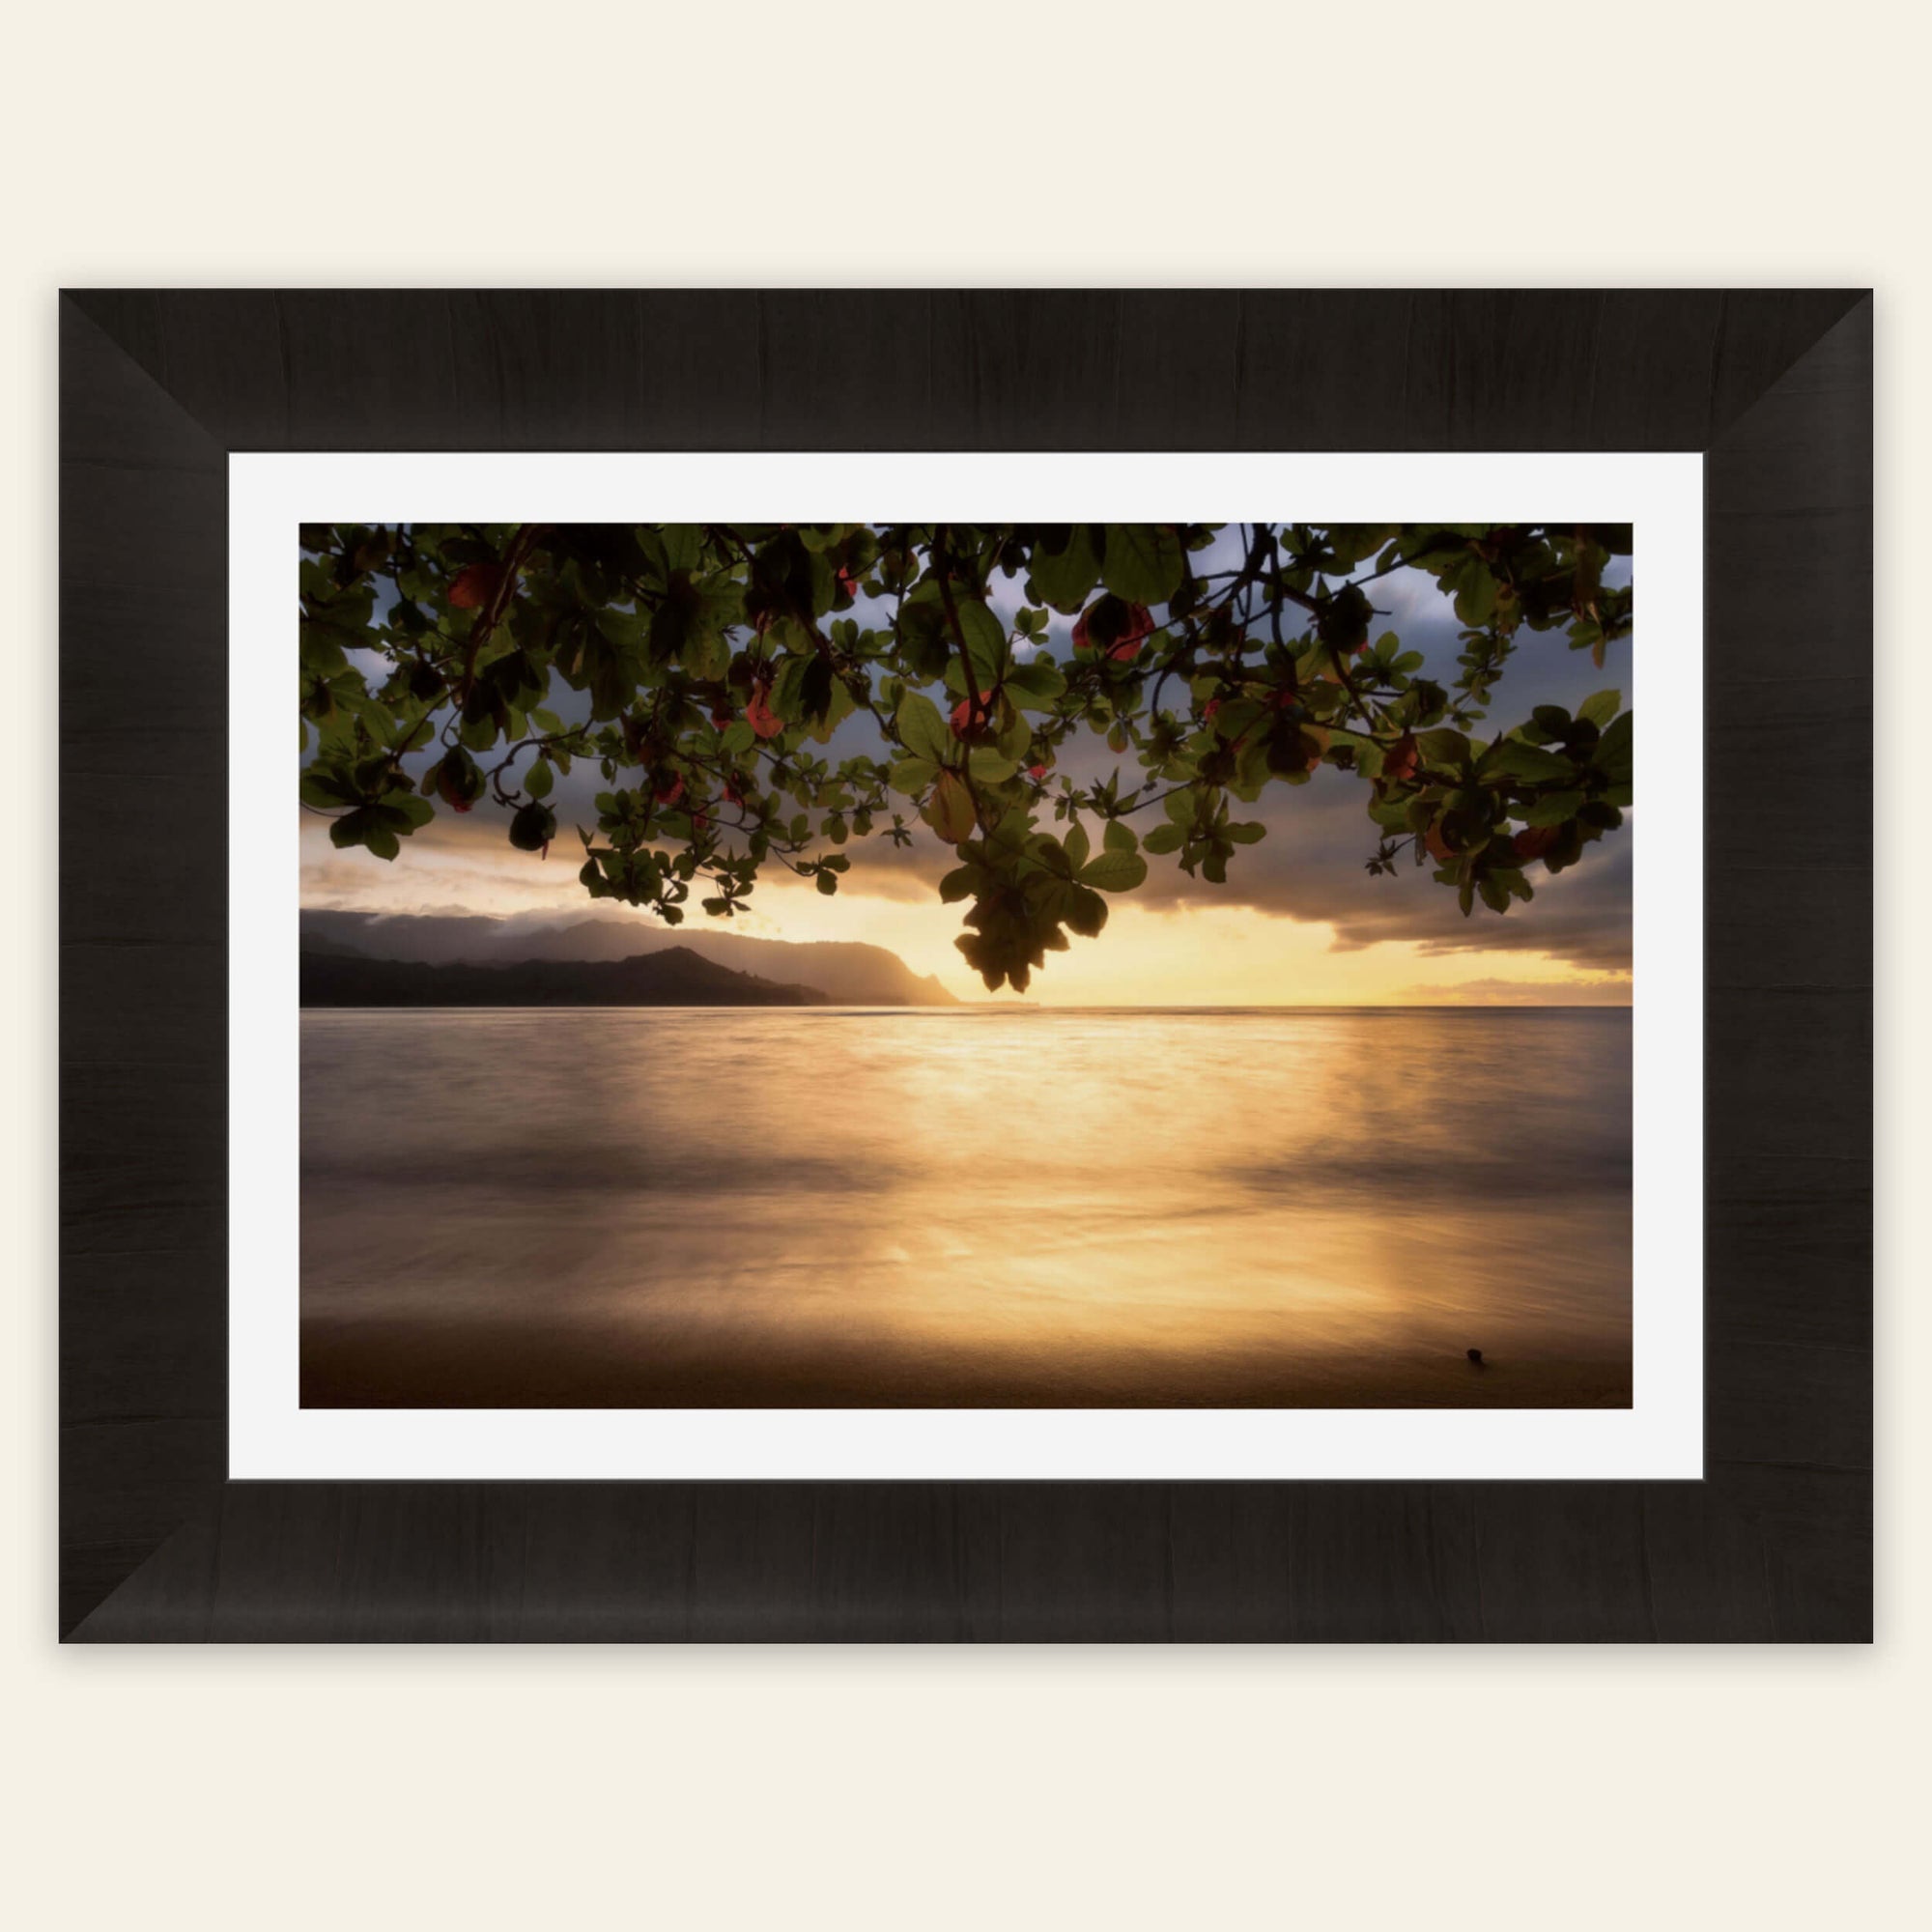 A framed picture of Pu'u Poa Beach at the Hanalei Bay Resort in Kauai.